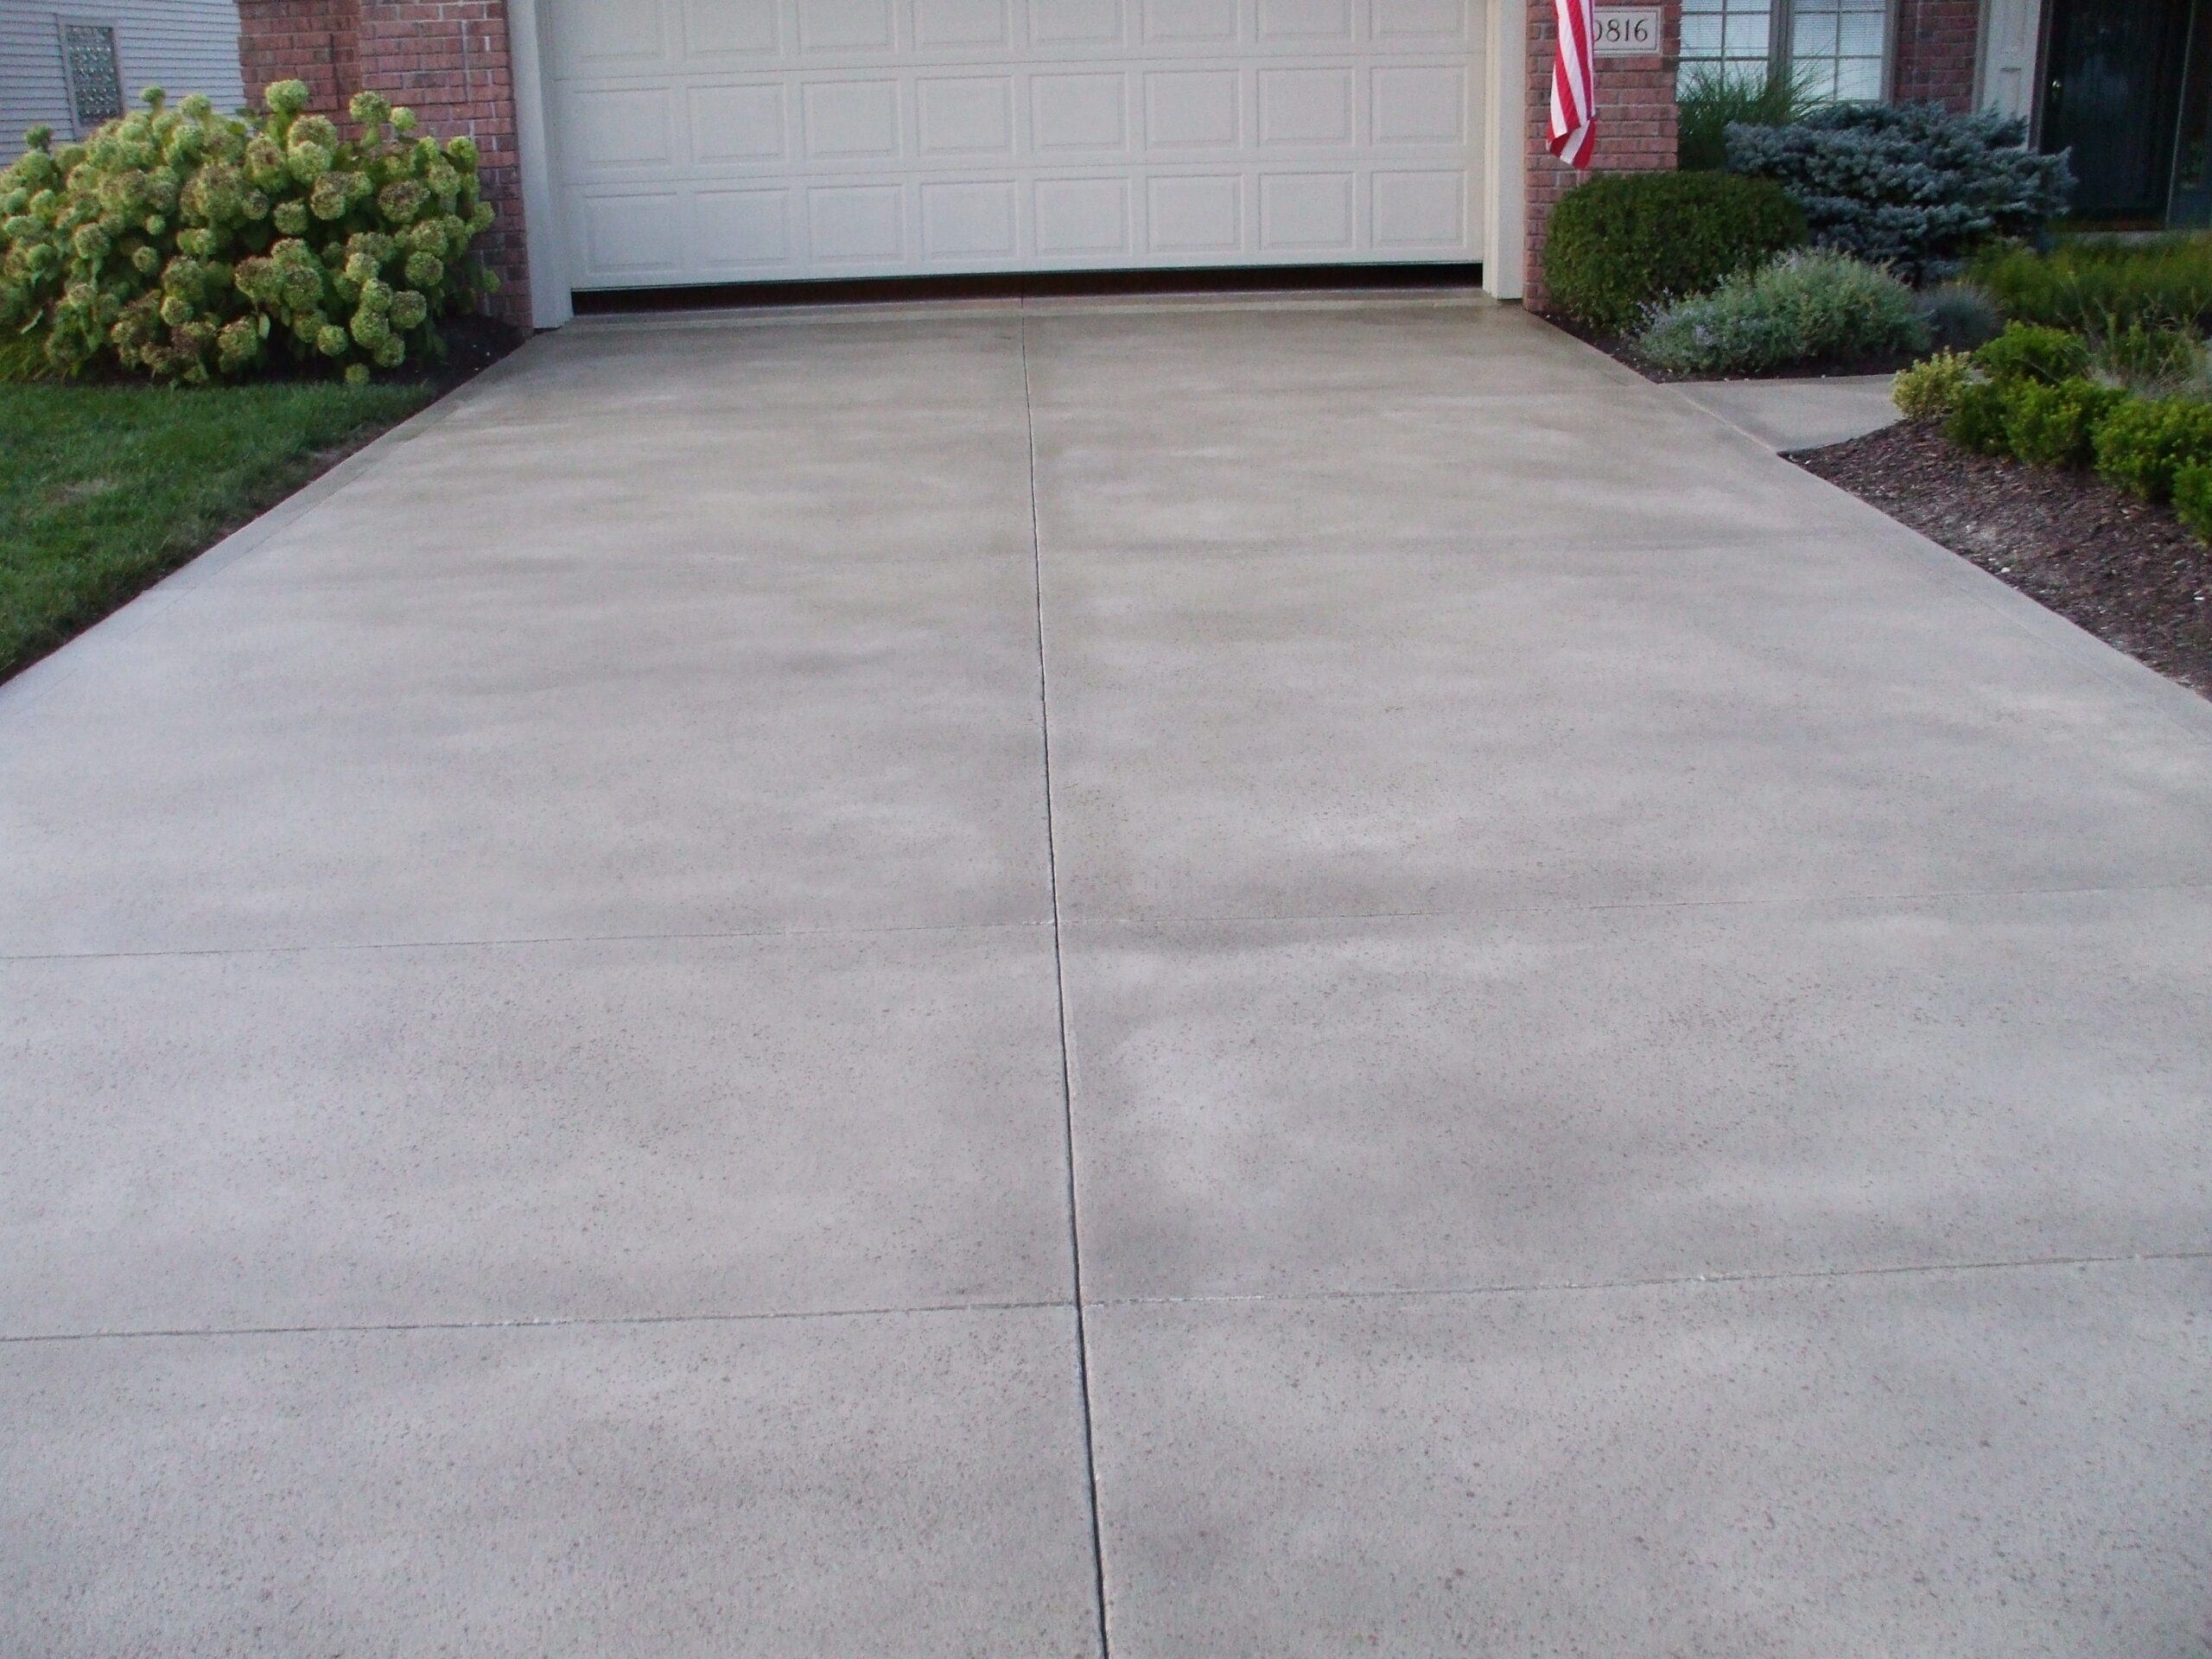 5 Signs That Your Concrete Driveway Needs Resurfacing In San Diego